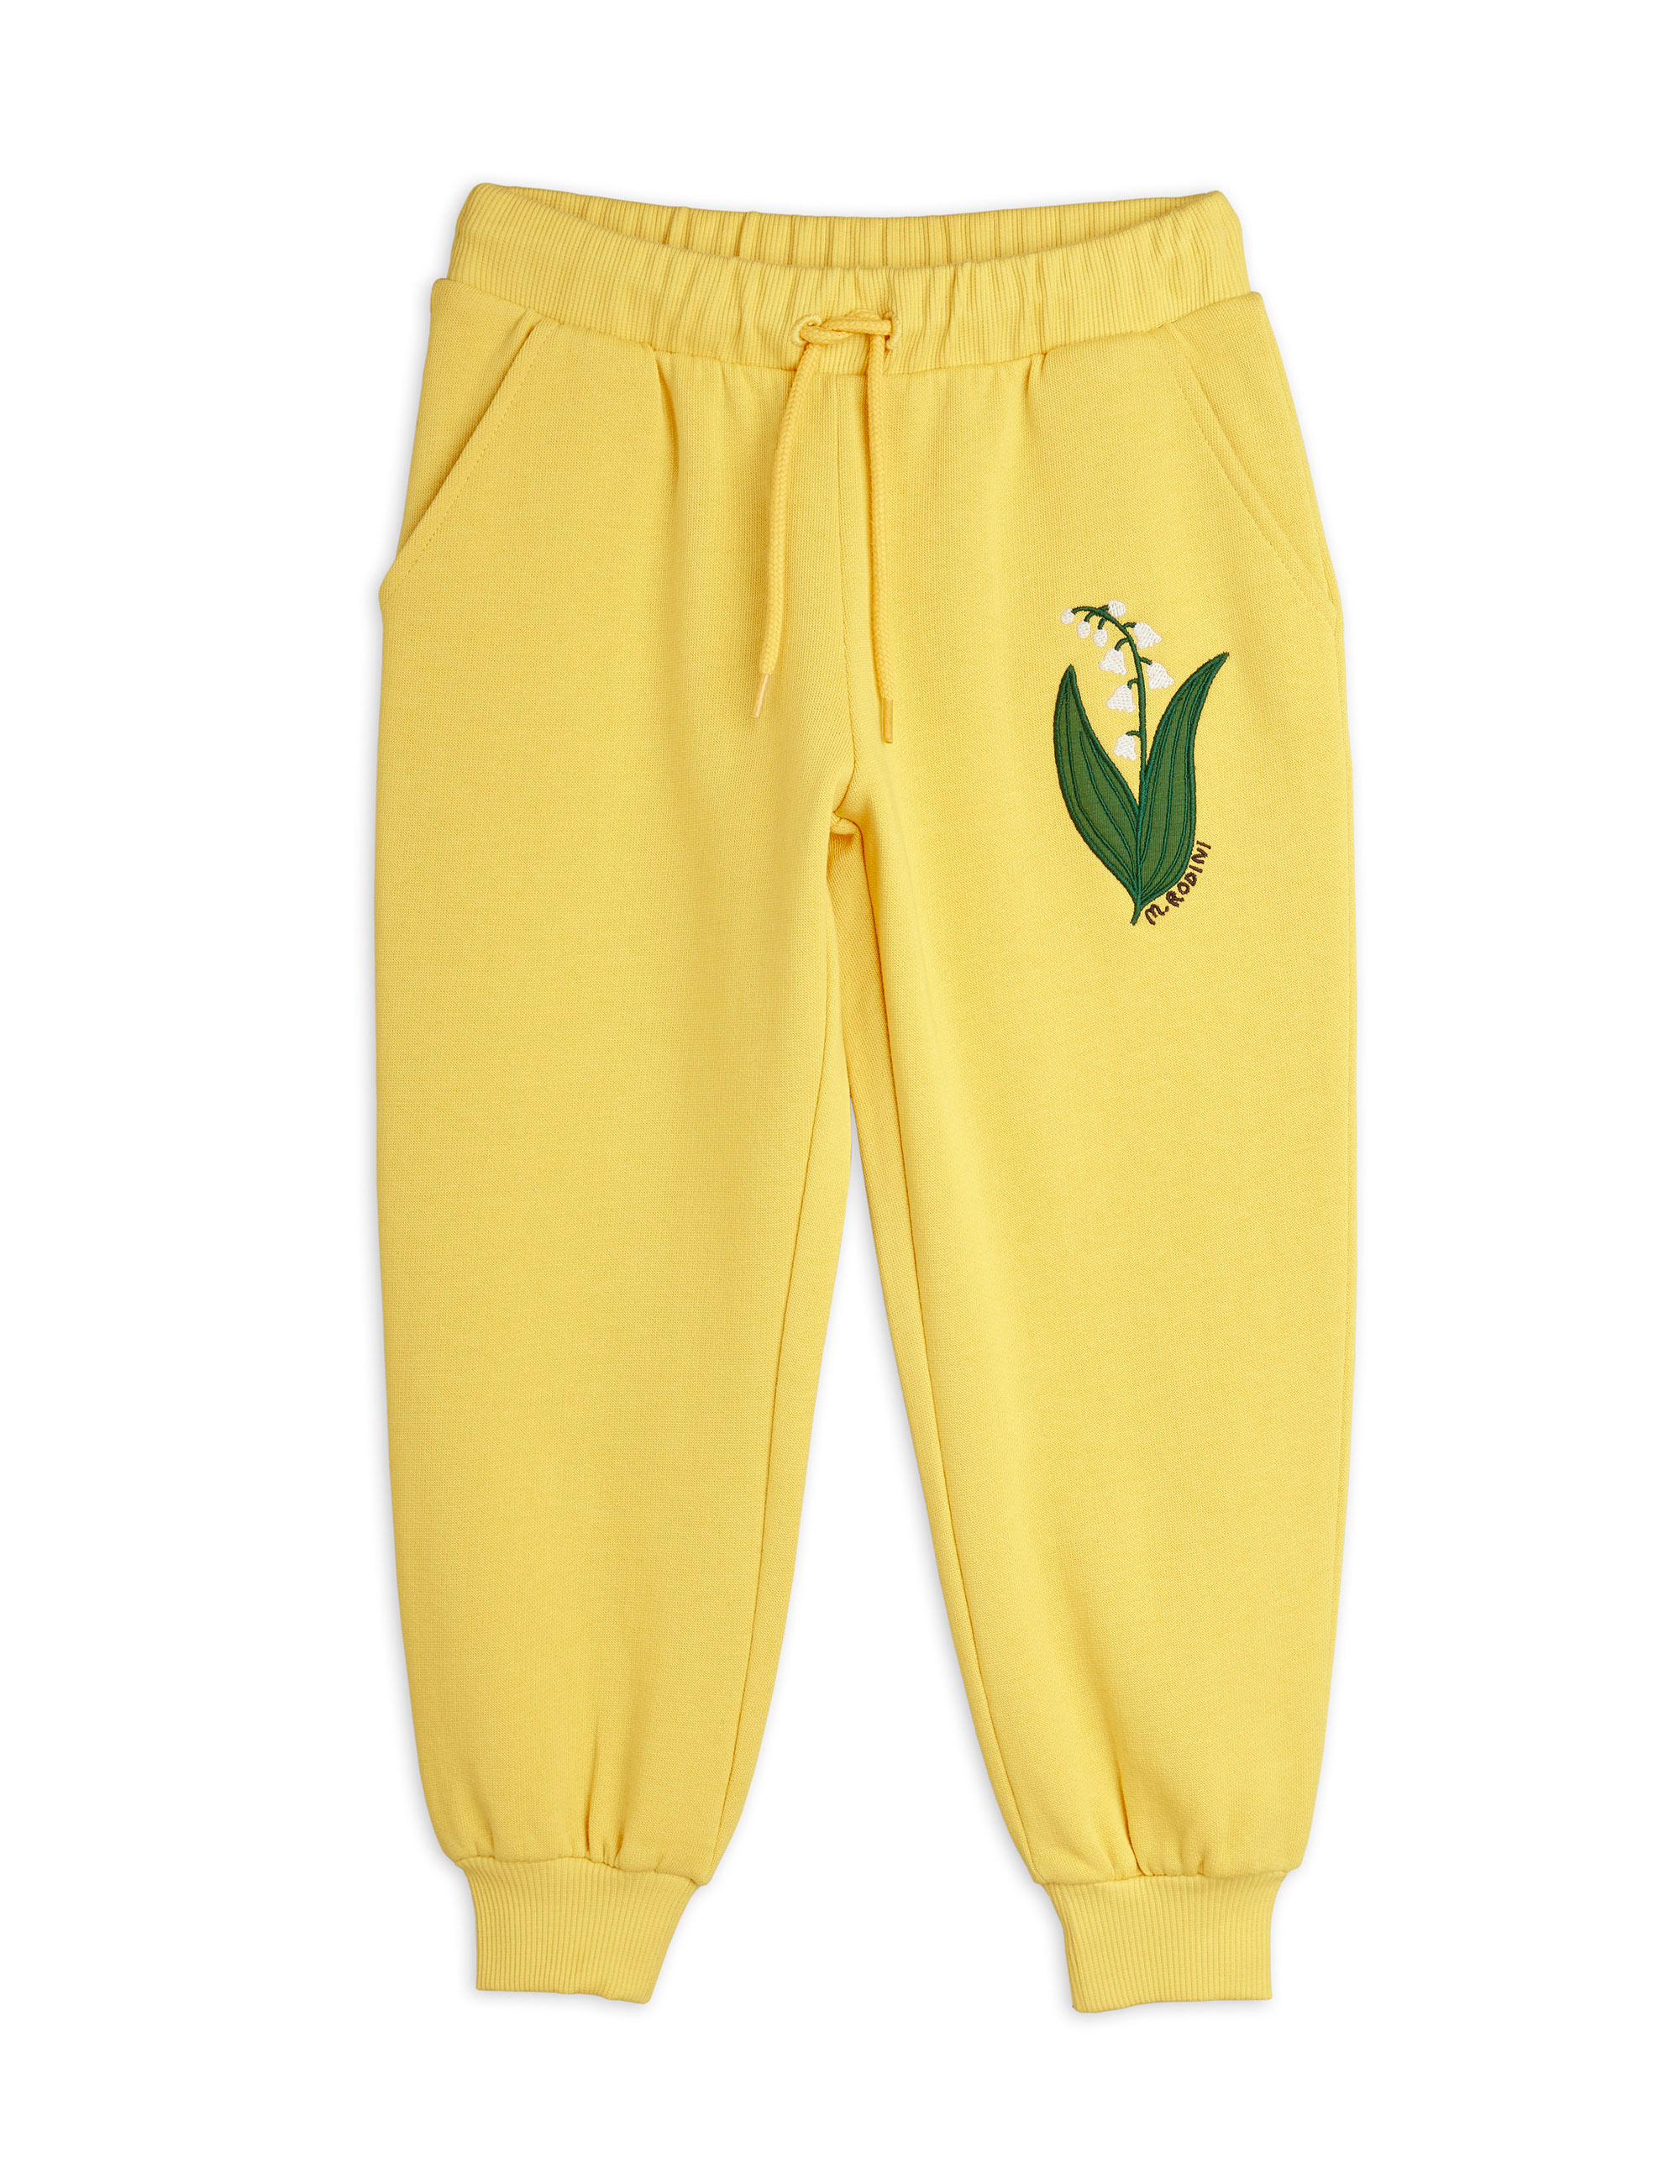 Sweatpants Lily of Valley yellow